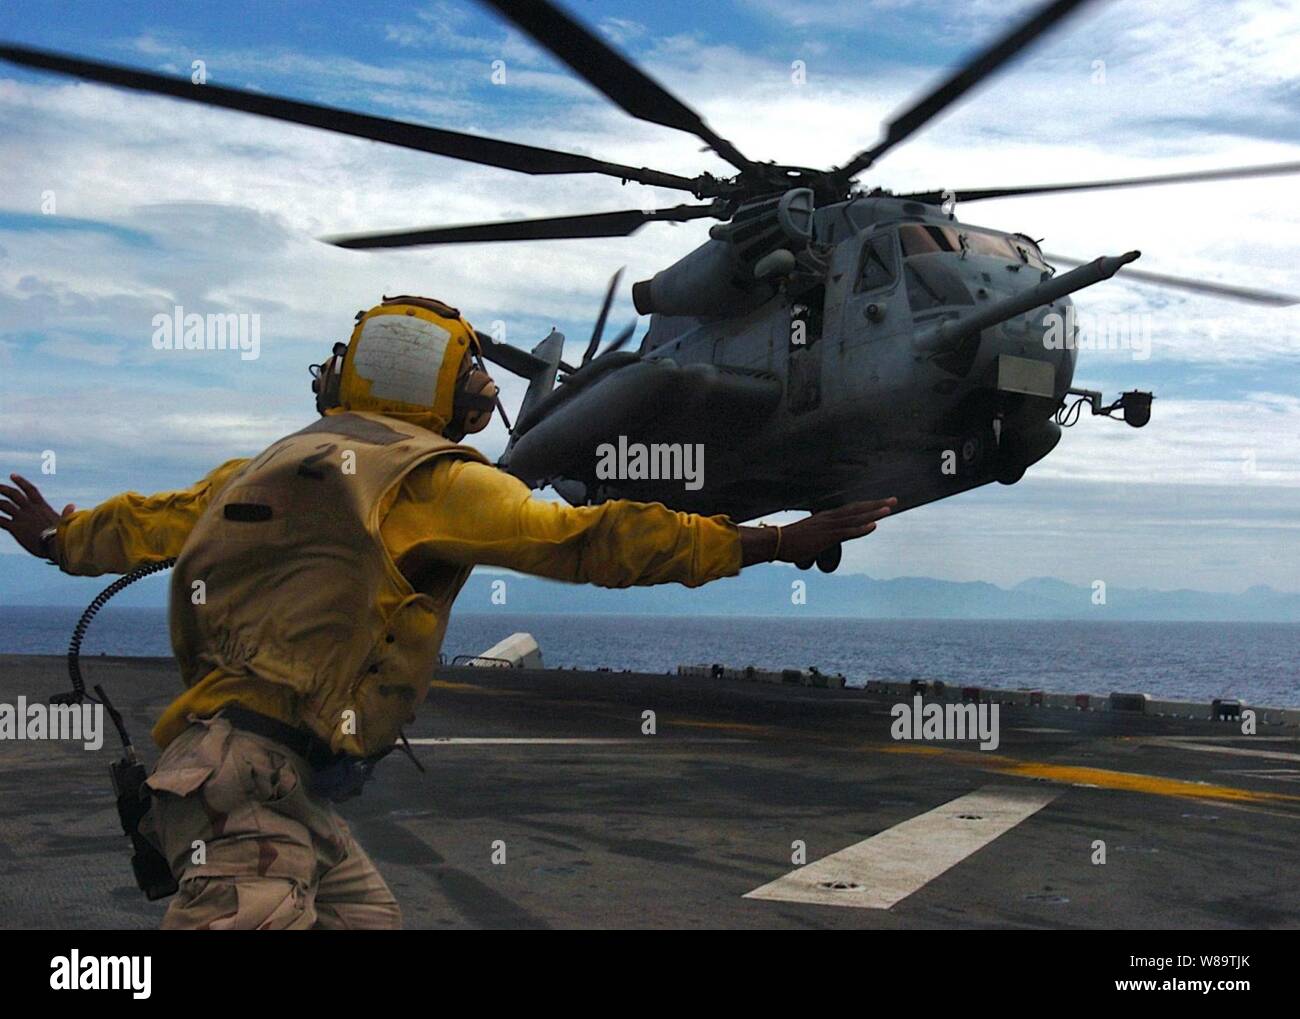 U.S. Navy Airman Sendy Jolicoeur directs a U.S. Marine Corps CH-53E Super Stallion helicopter to land aboard the USS Essex (LHD 2) as the ship operates in the Philippine Sea on Oct. 28, 2006.  The ship, its embarked Marines and Philippine armed forces are conducting bilateral training exercises Talon Vision and Amphibious Landing Exercise FY '07, designed to enhance interoperability and professional military relations. Stock Photo